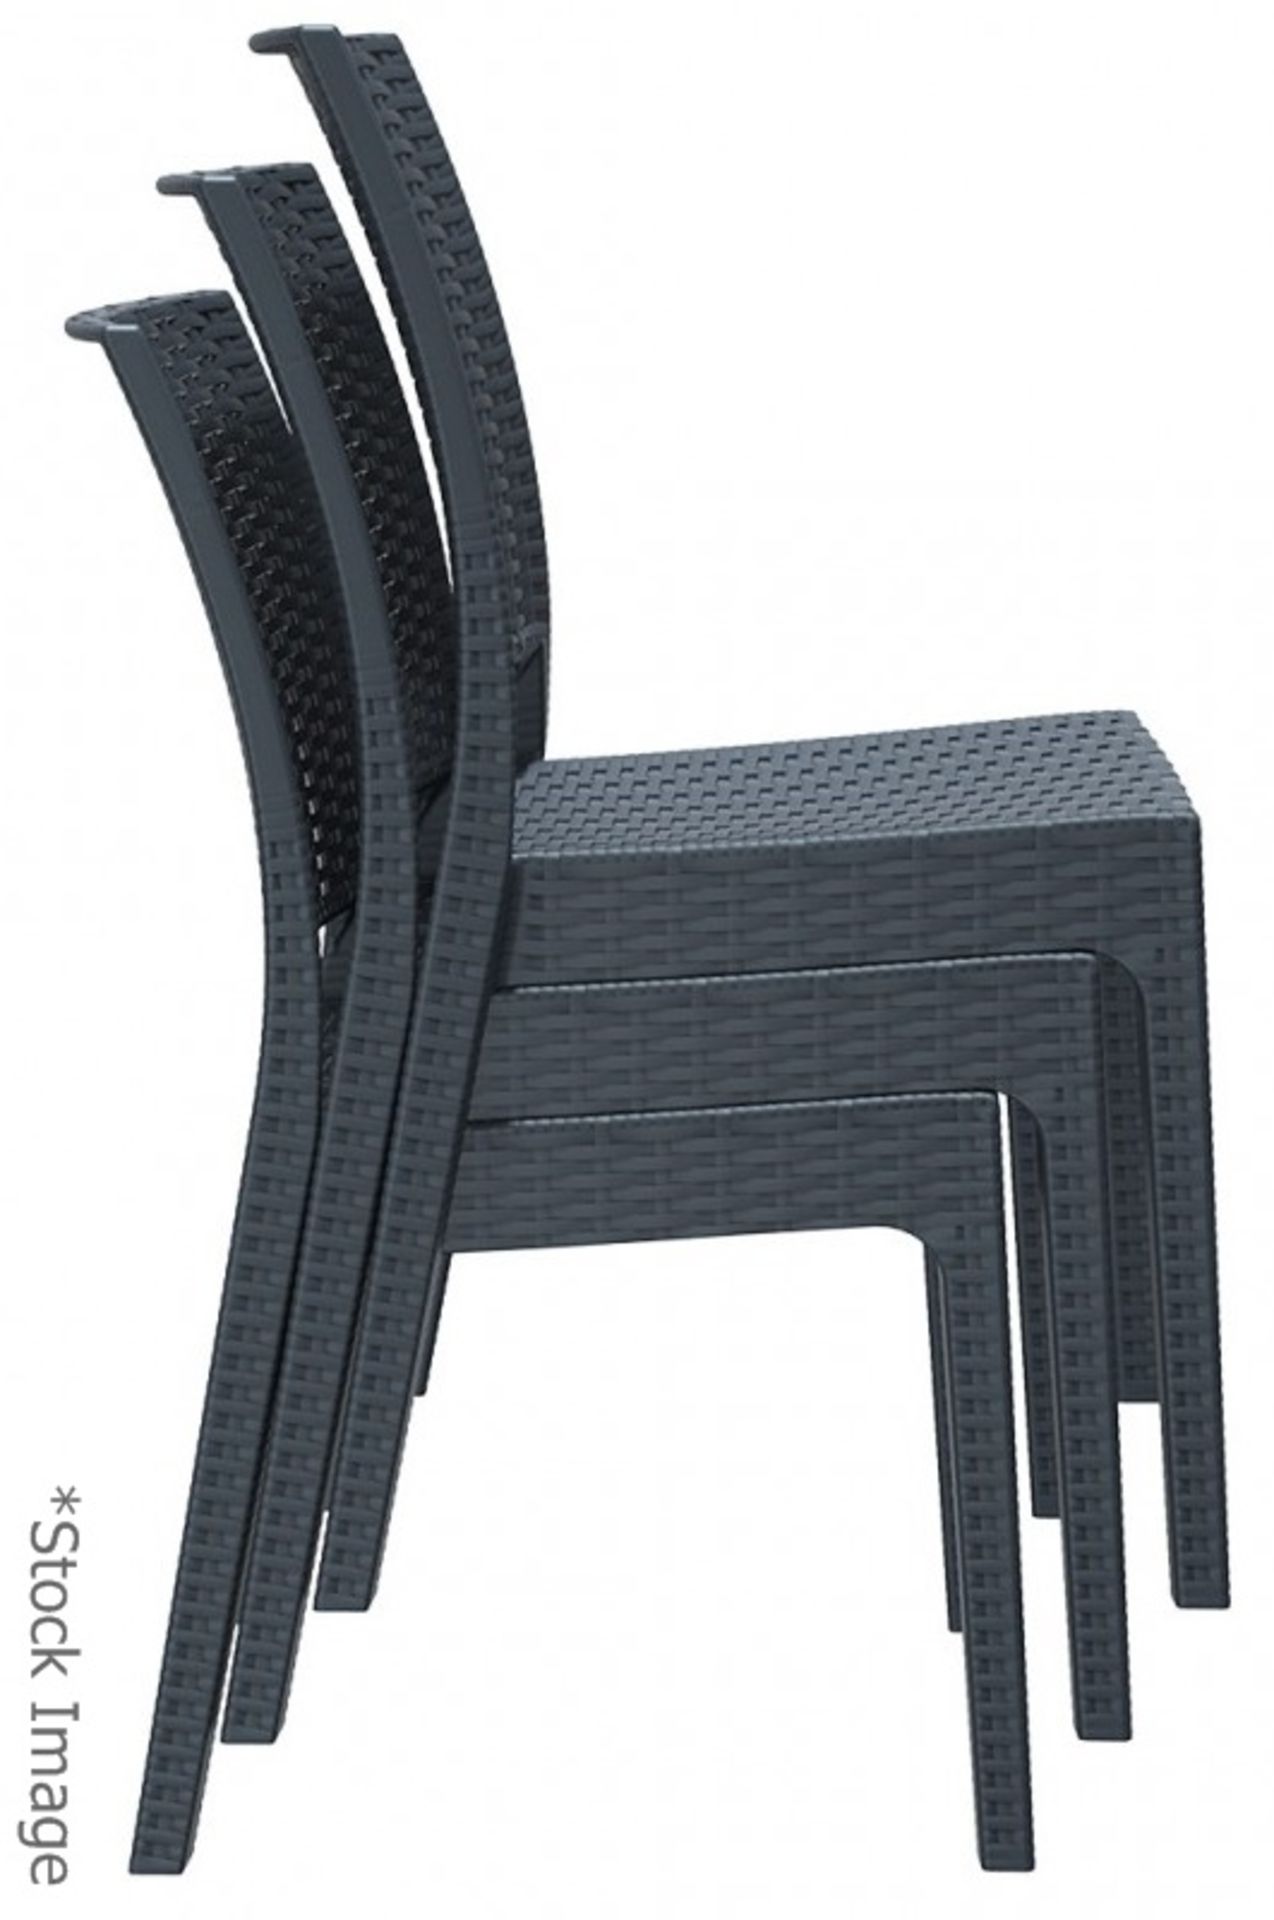 4 x SIESTA EXCLUSIVE 'Florida' Commercial Stackable Rattan-style Chairs In Dark Grey -CL987 - - Image 3 of 13